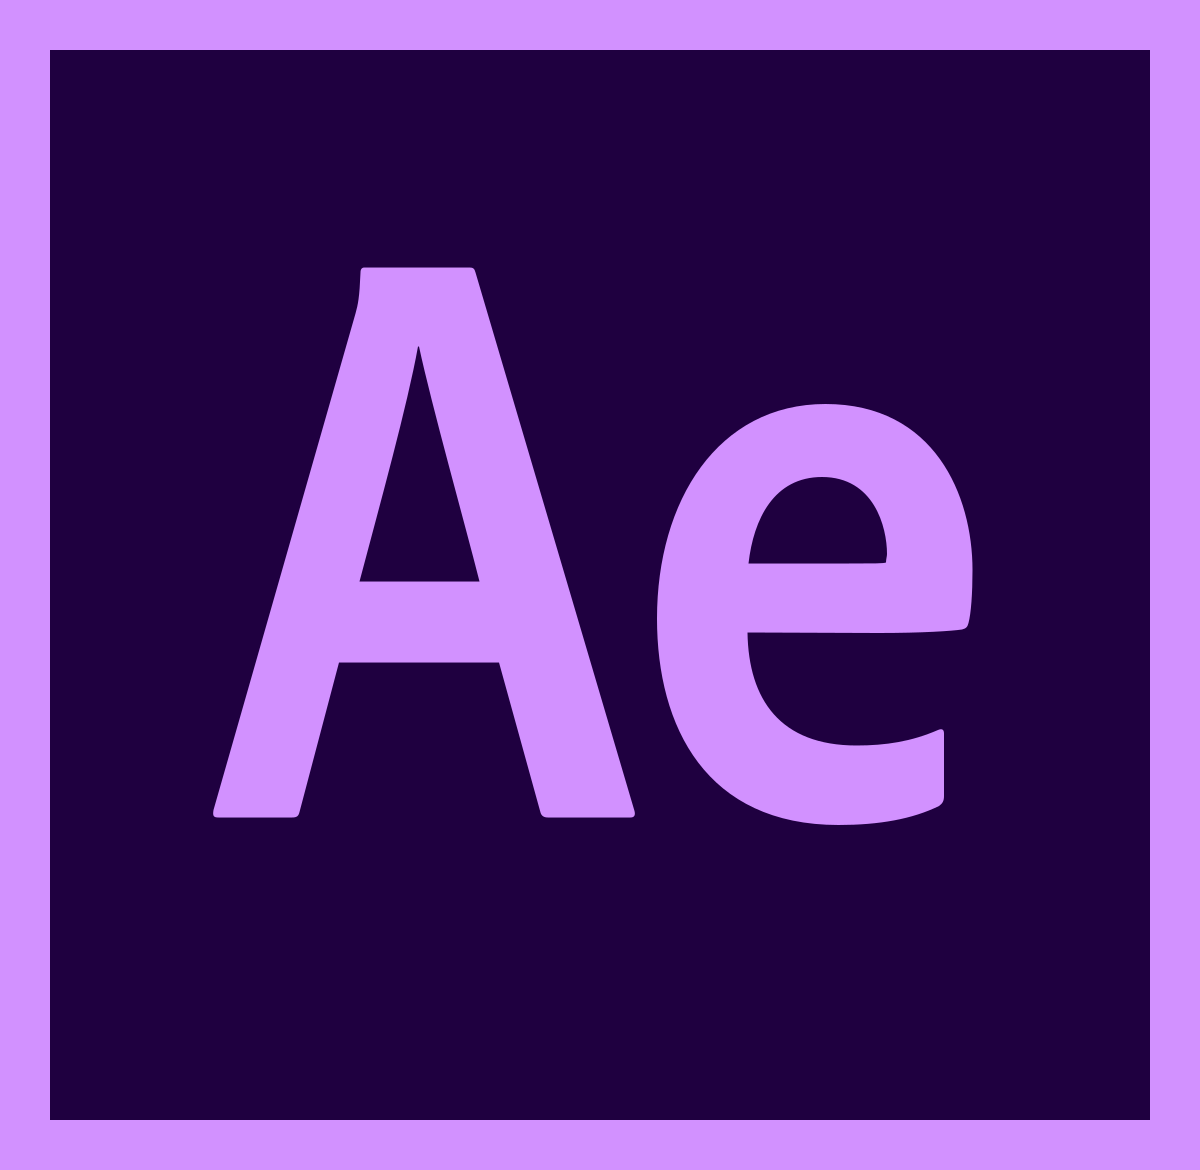 New Adobe Logo - Adobe After Effects